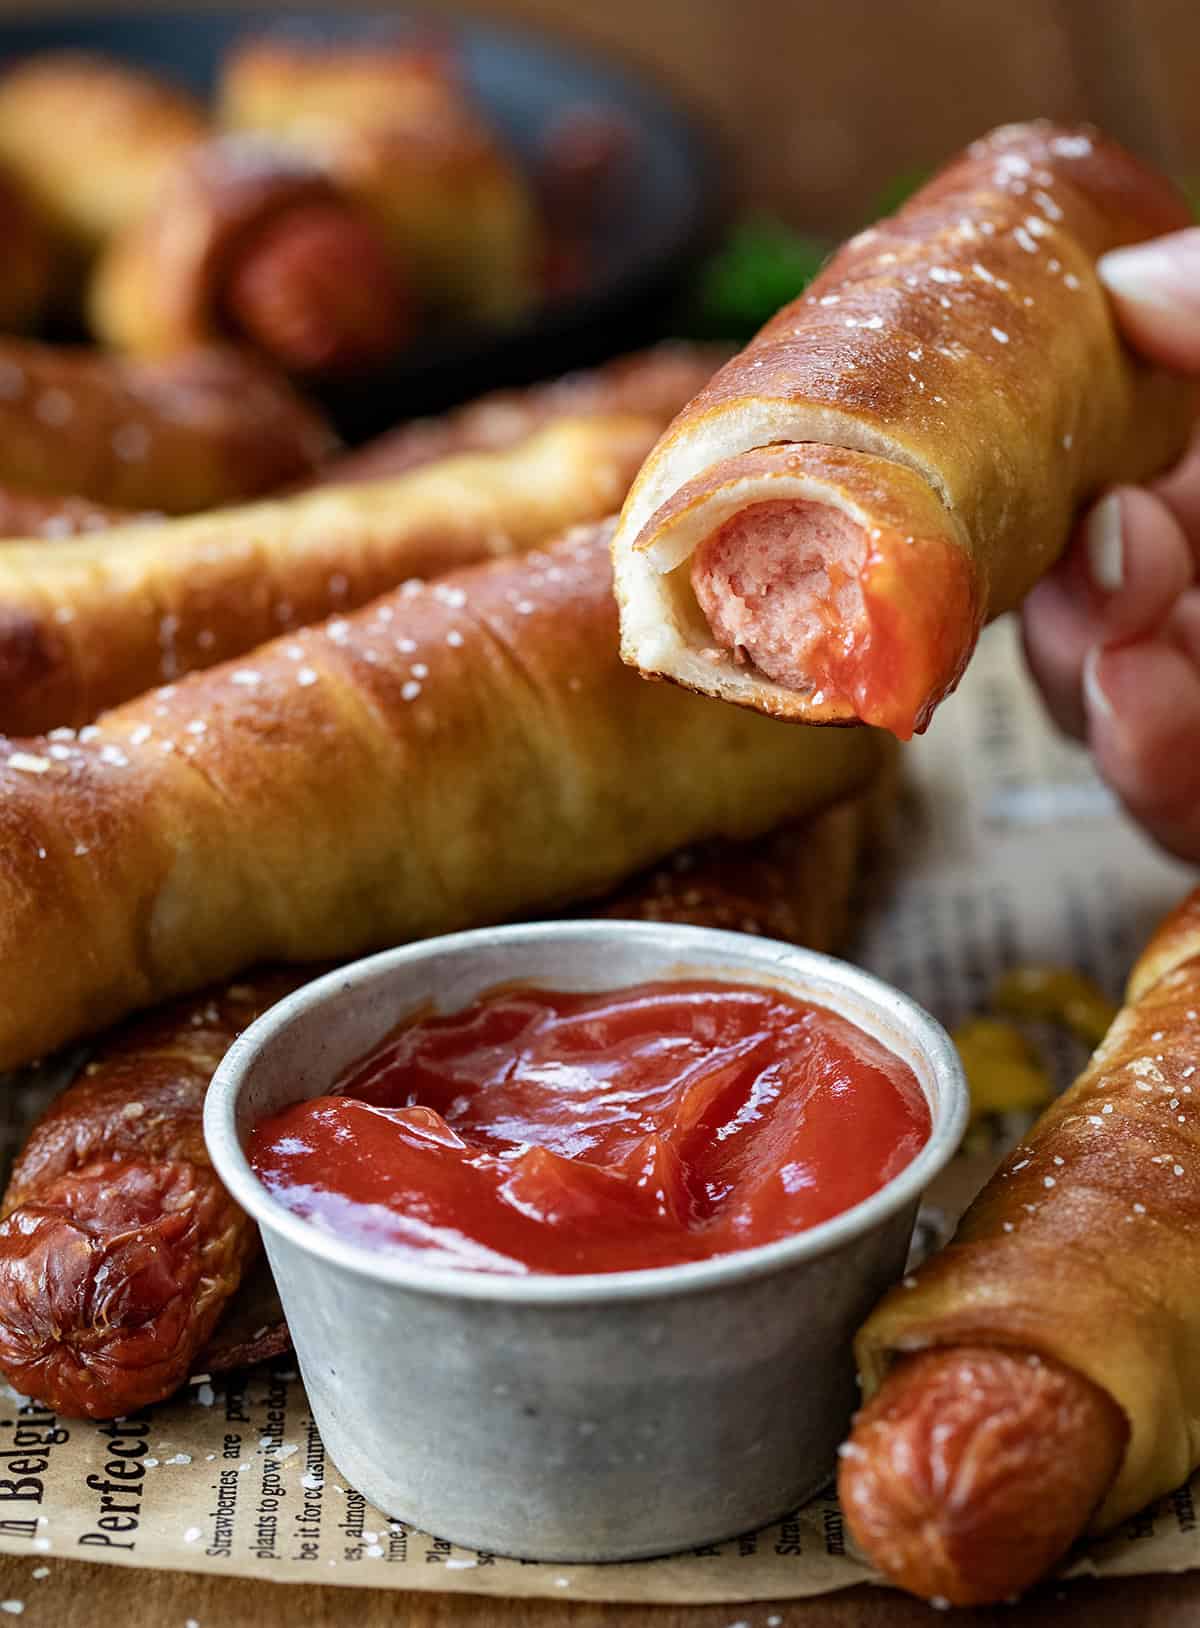 Dipping a Pretzel Dog into ketchup and a bite taken out of it.